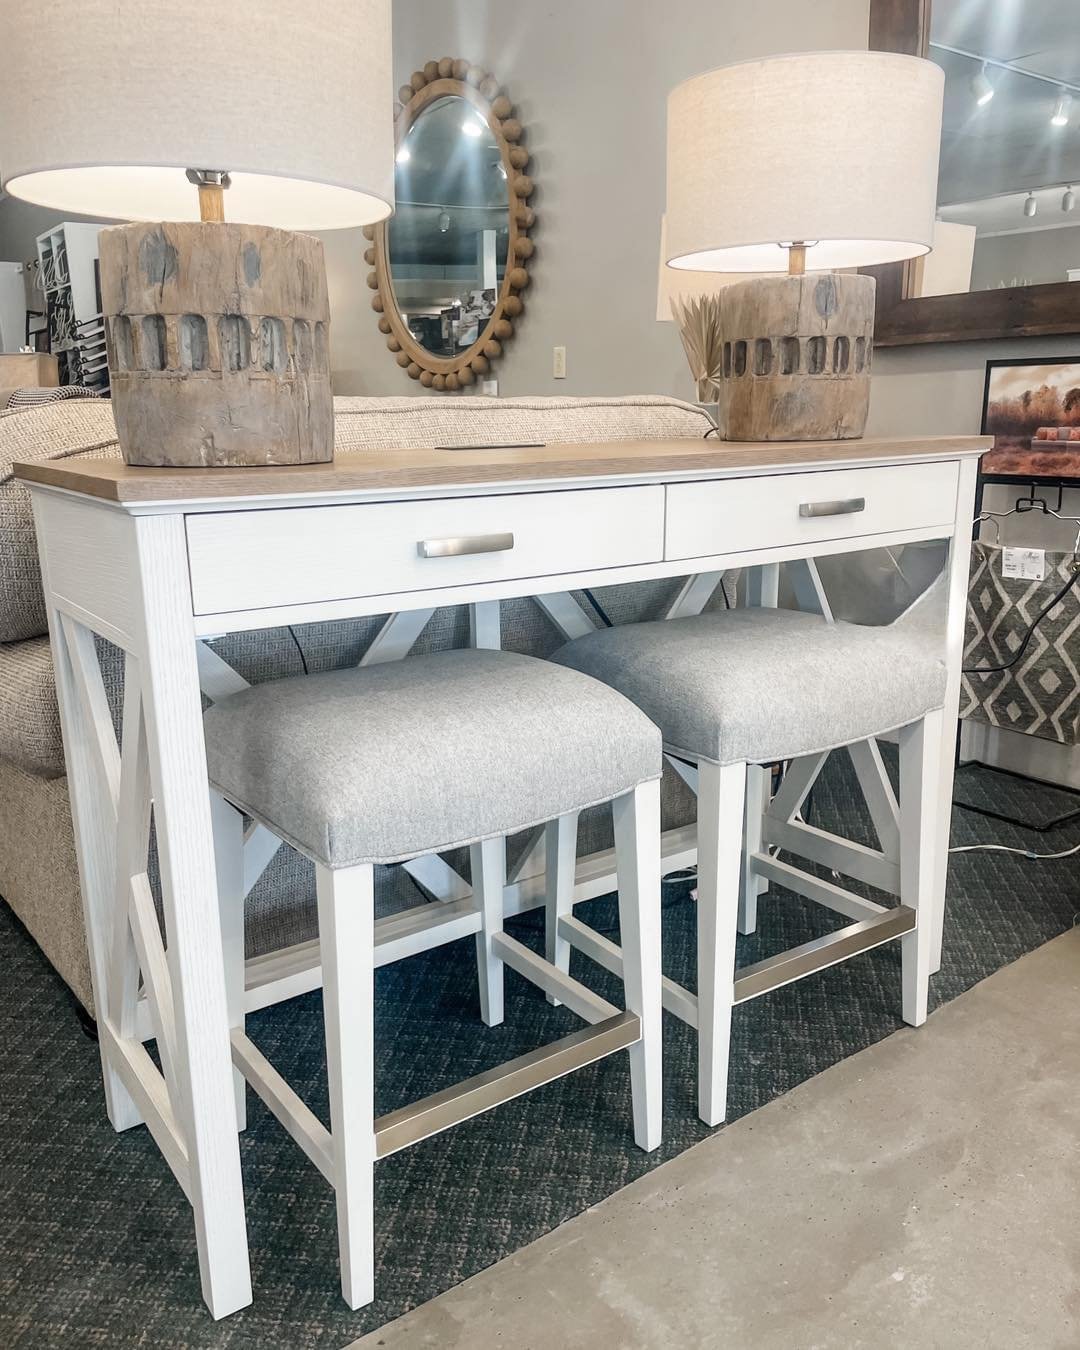 This Sofa Table Console is ready for delivery today! This piece comes equipped with 2 standard plugs and 2 USB ports, as well as two drawers for storage! This console piece sits as 52&rdquo; W x 18&rdquo; D x 36&rdquo; H making it the perfect size fo